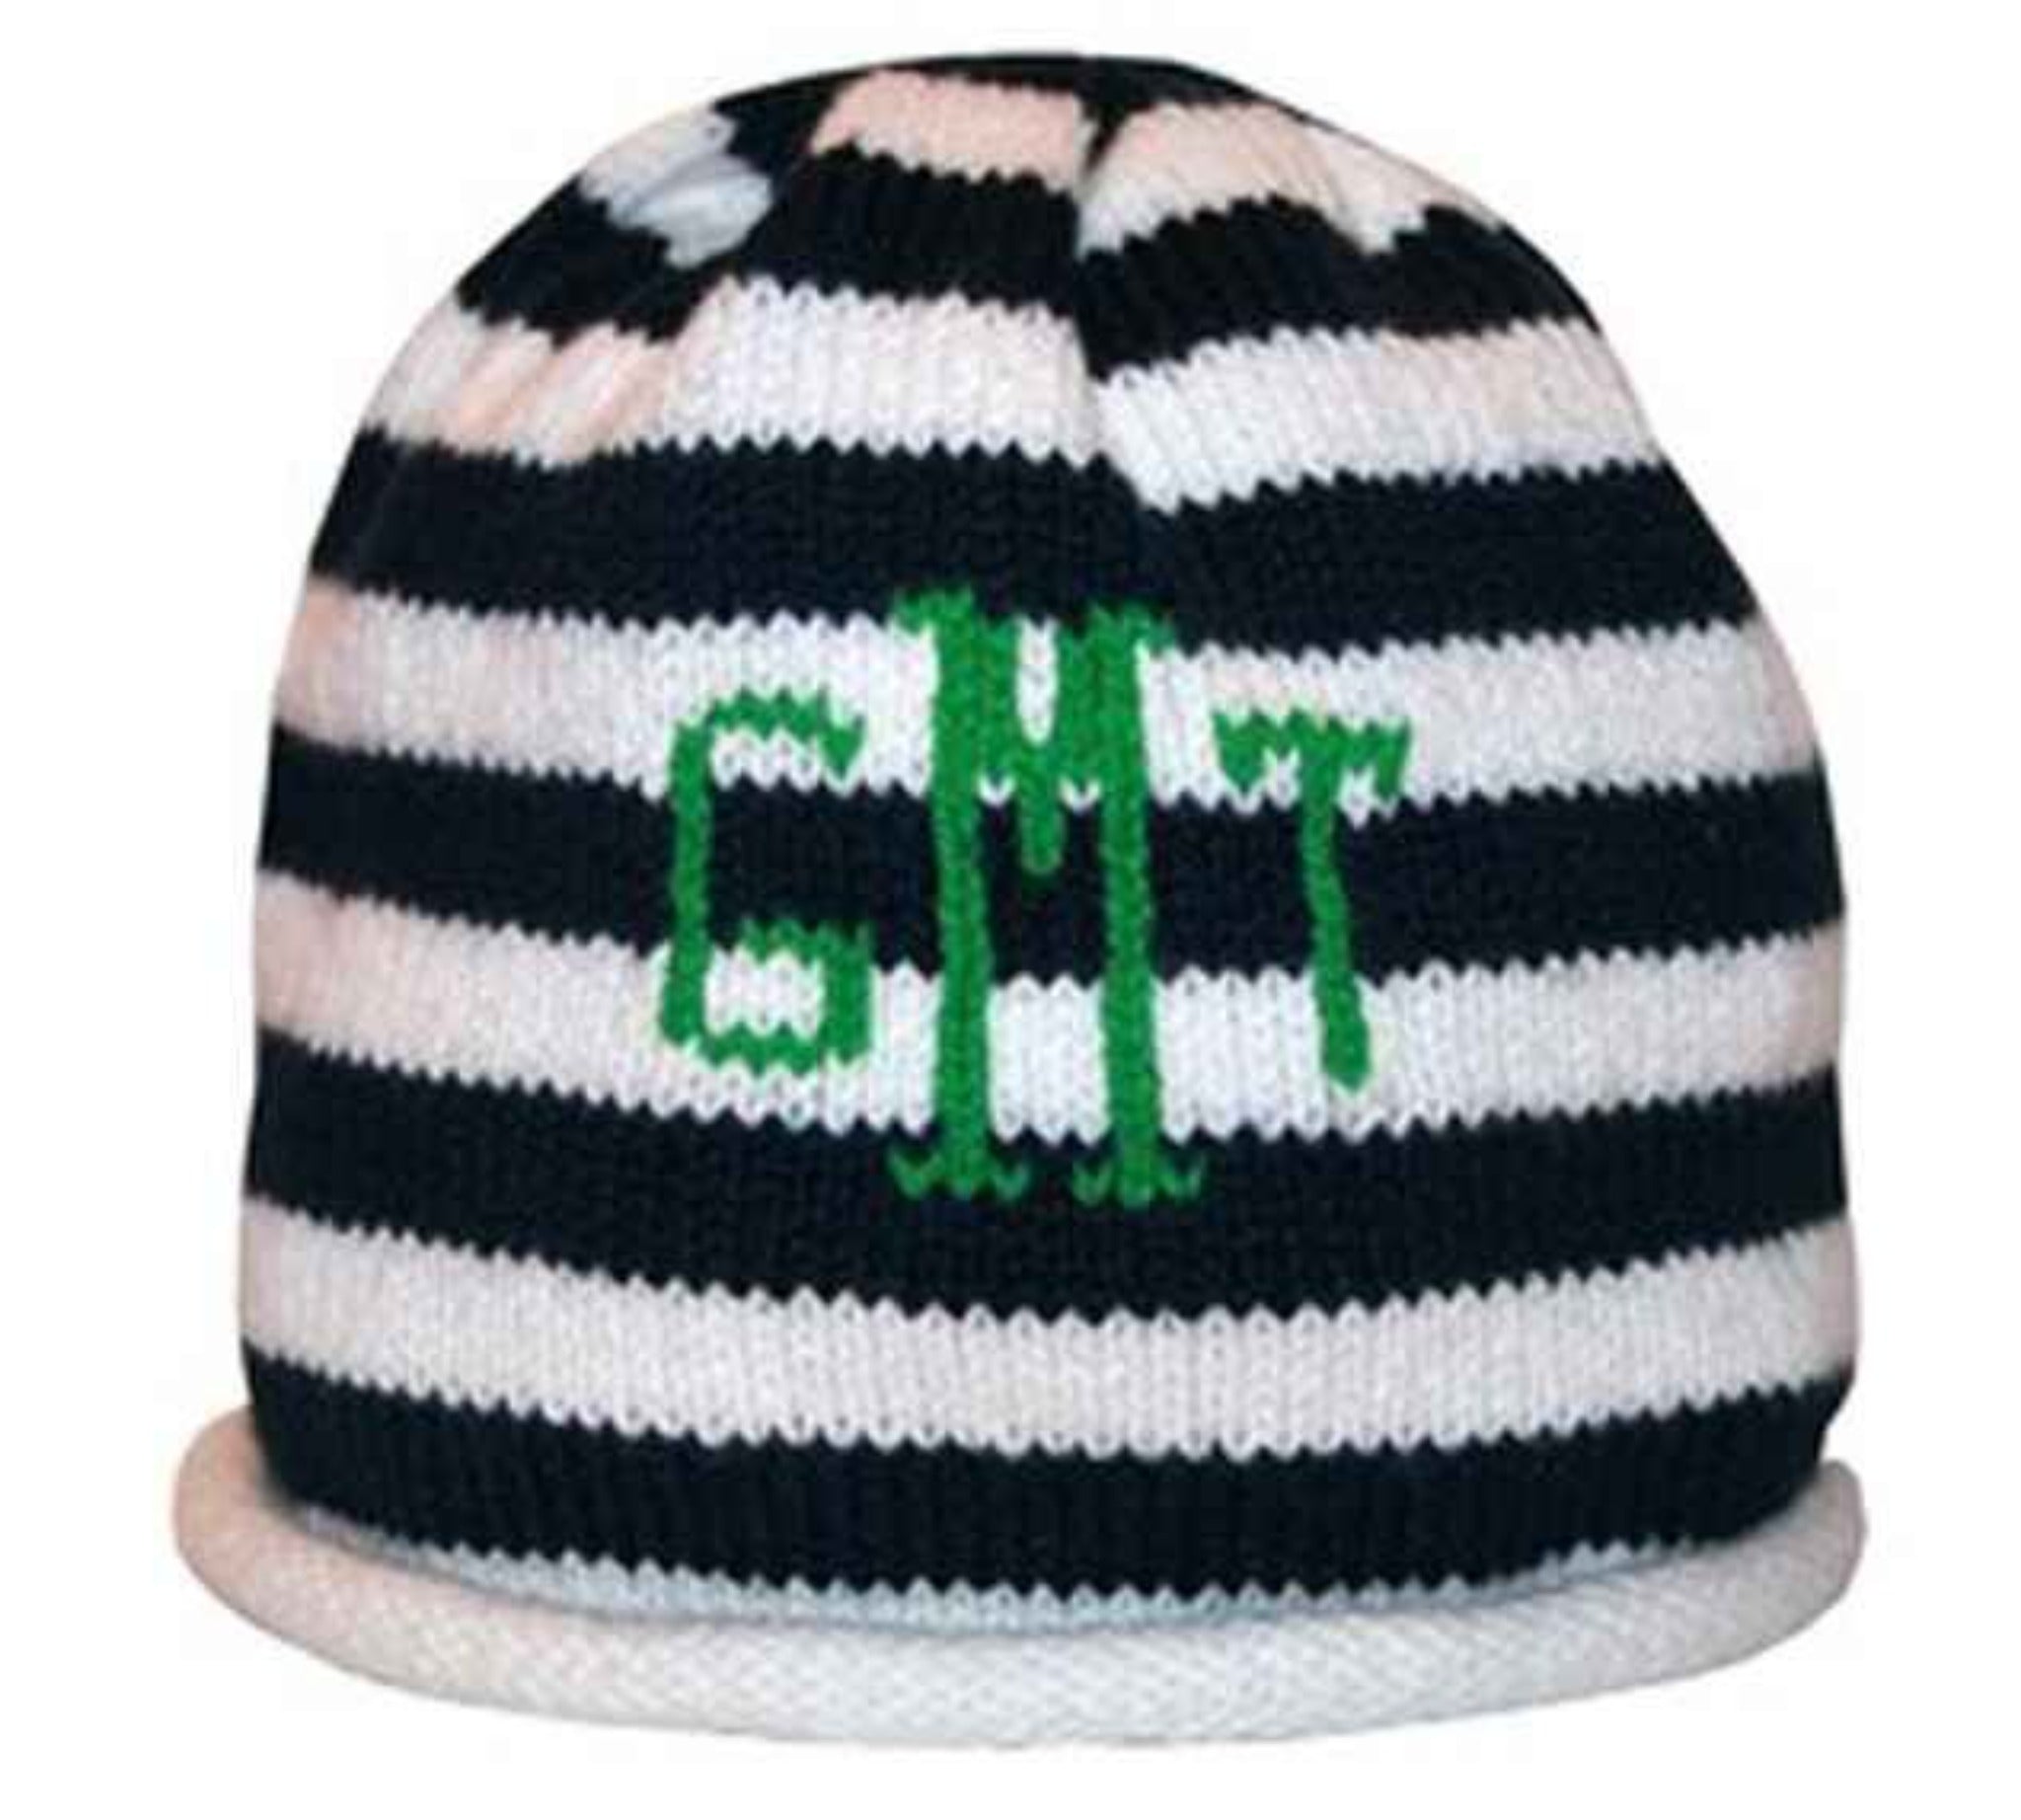 Striped Roll Hat with Name or Monogram - Custom Knits for Baby